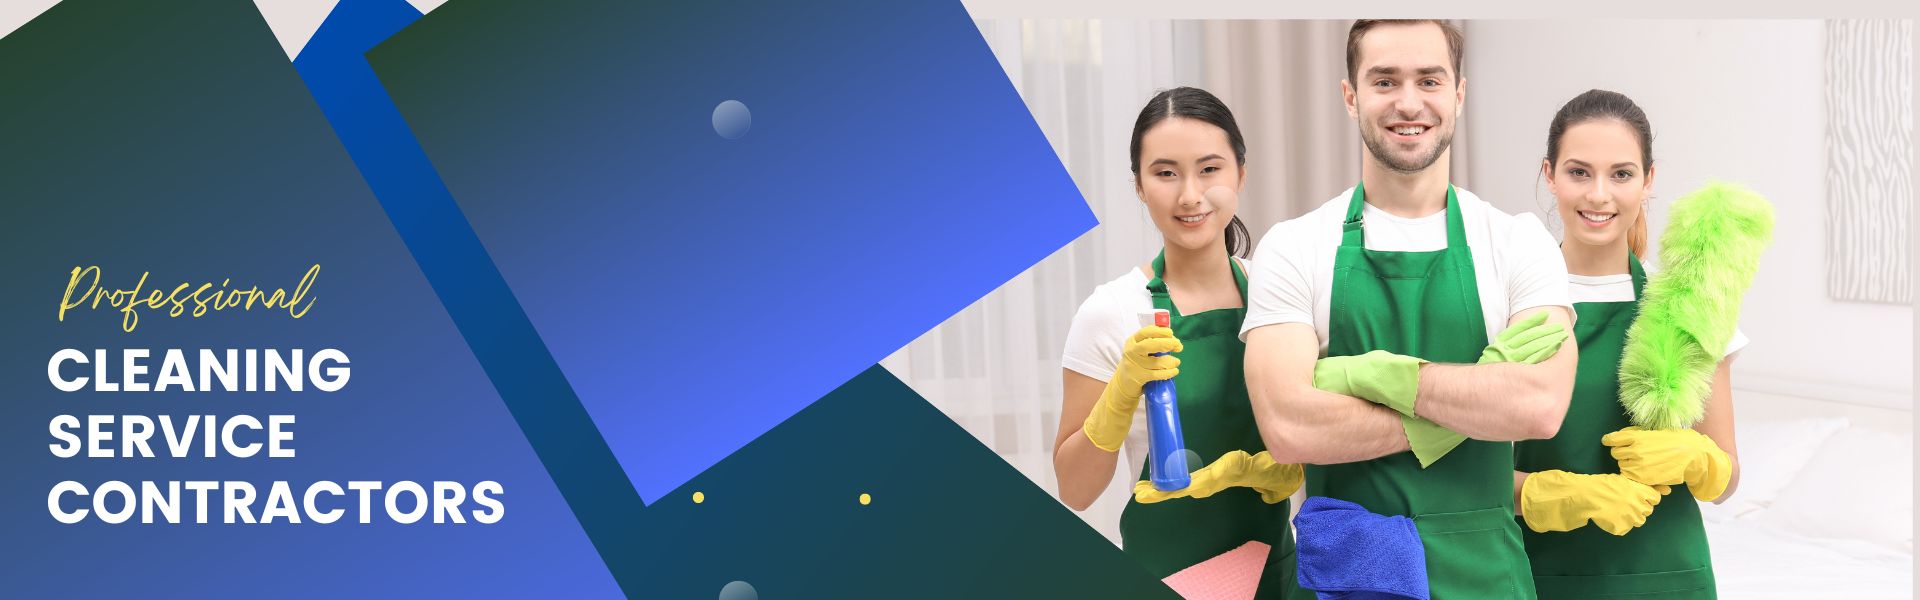 Are You a Cleaning Contractor? Find How to Meet Authentic Clients Online